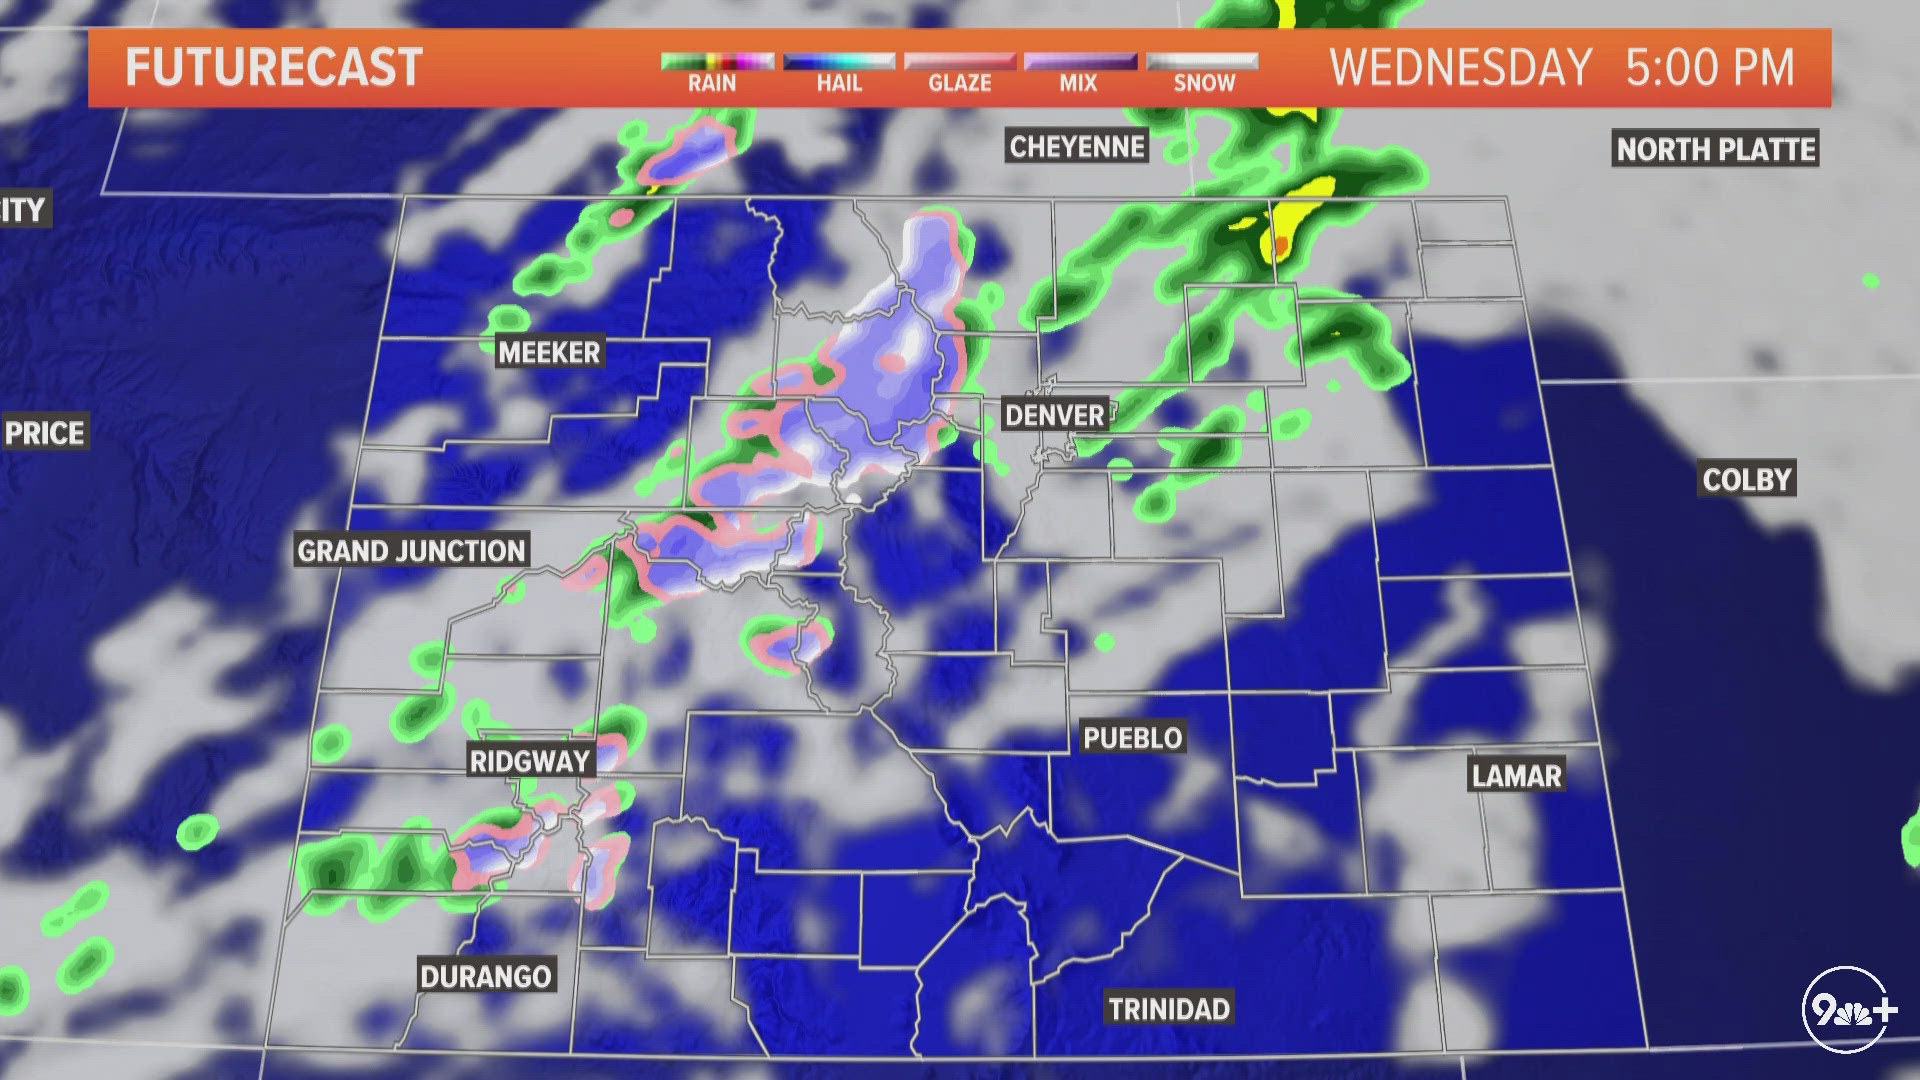 Colorado will be mild and cloudy on Wednesday with a chance for showers and storms after 3 p.m. and into the evening.